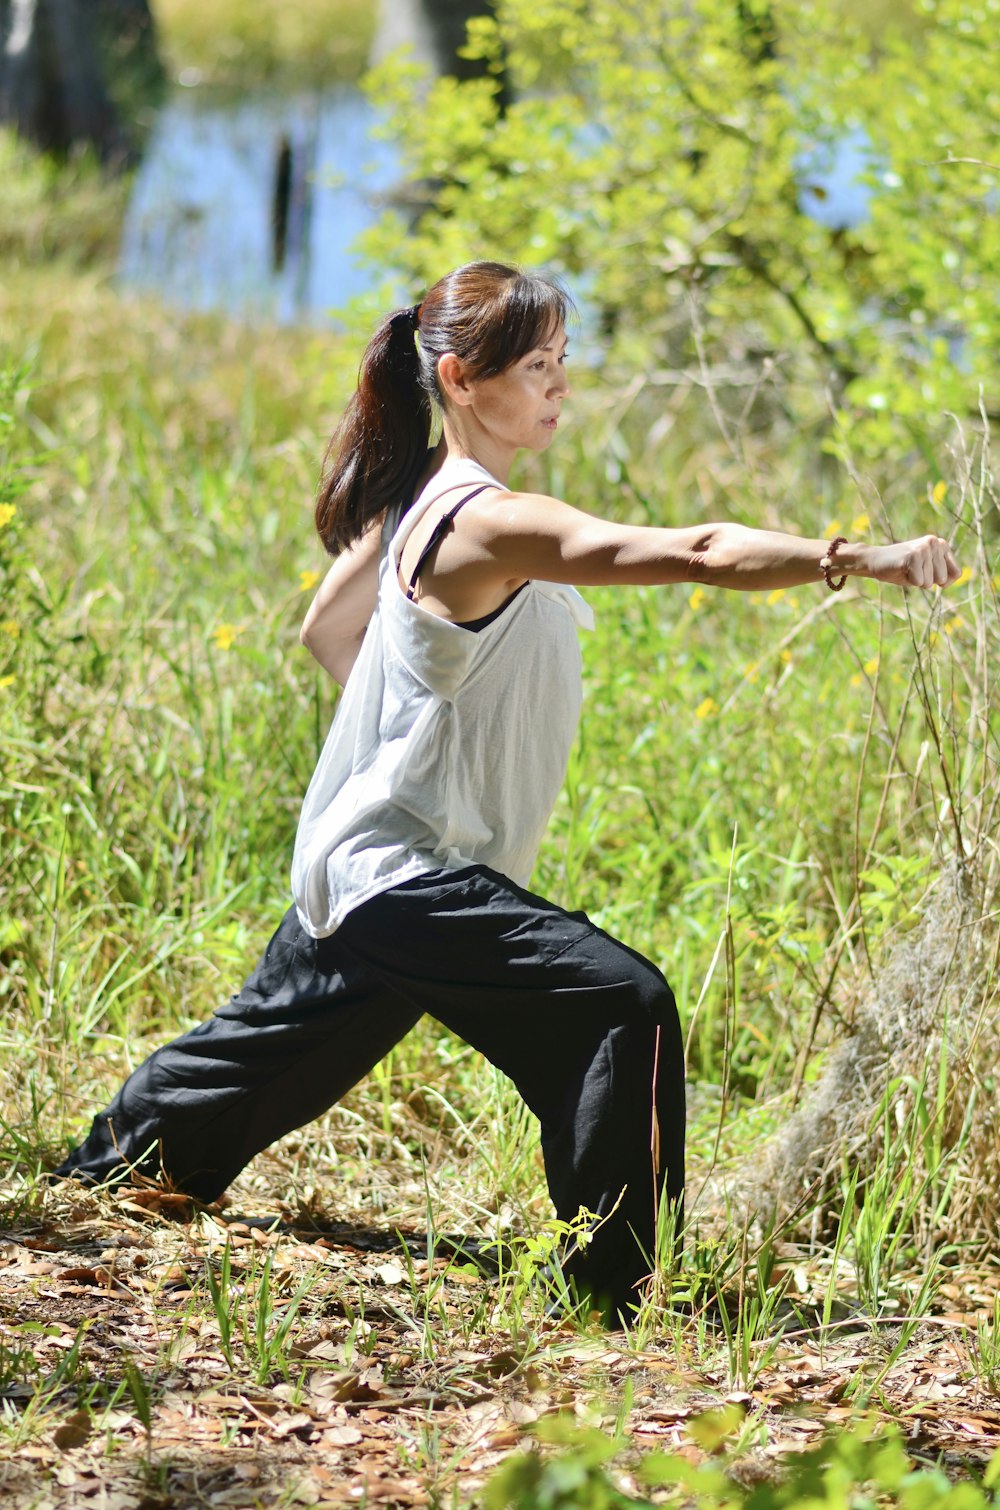 a woman in a white shirt and black pants doing a yoga pose